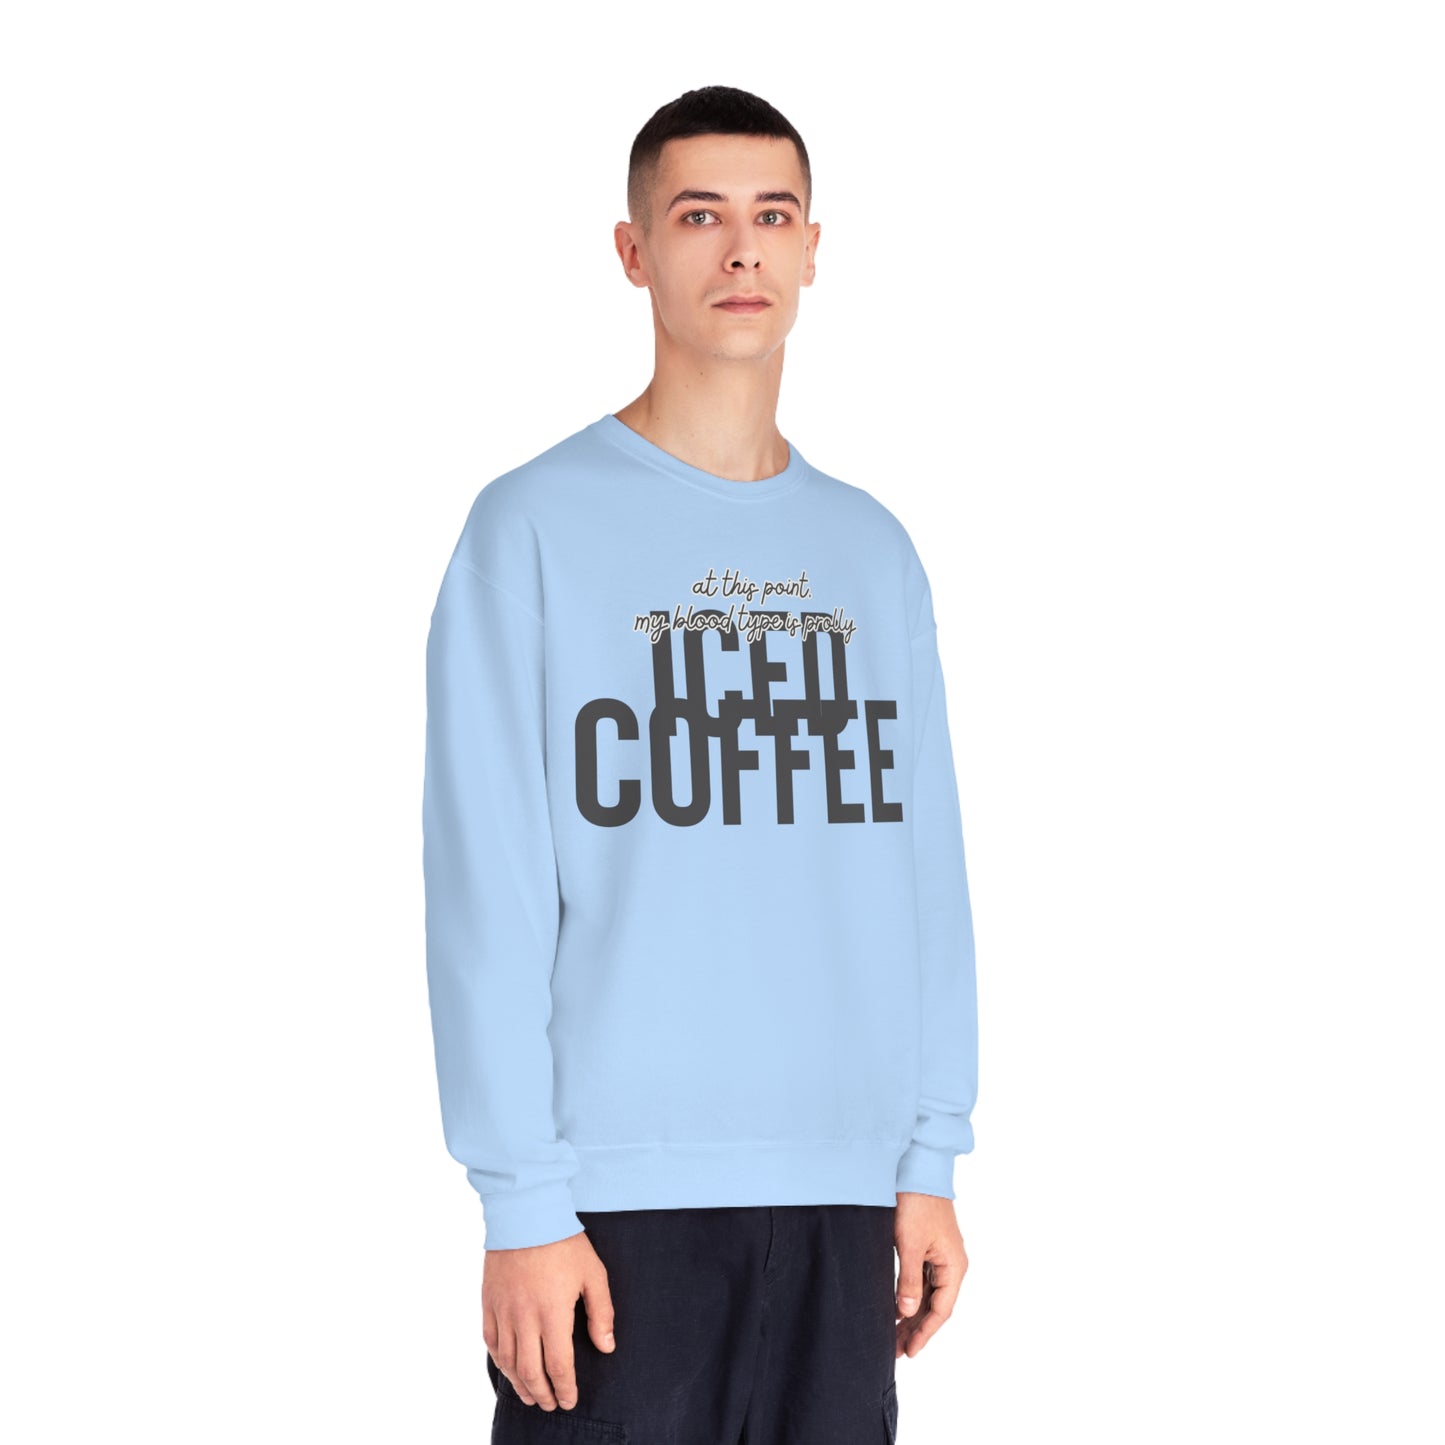 At This Point My Blood Type Is Prolly Iced Coffee Sweater